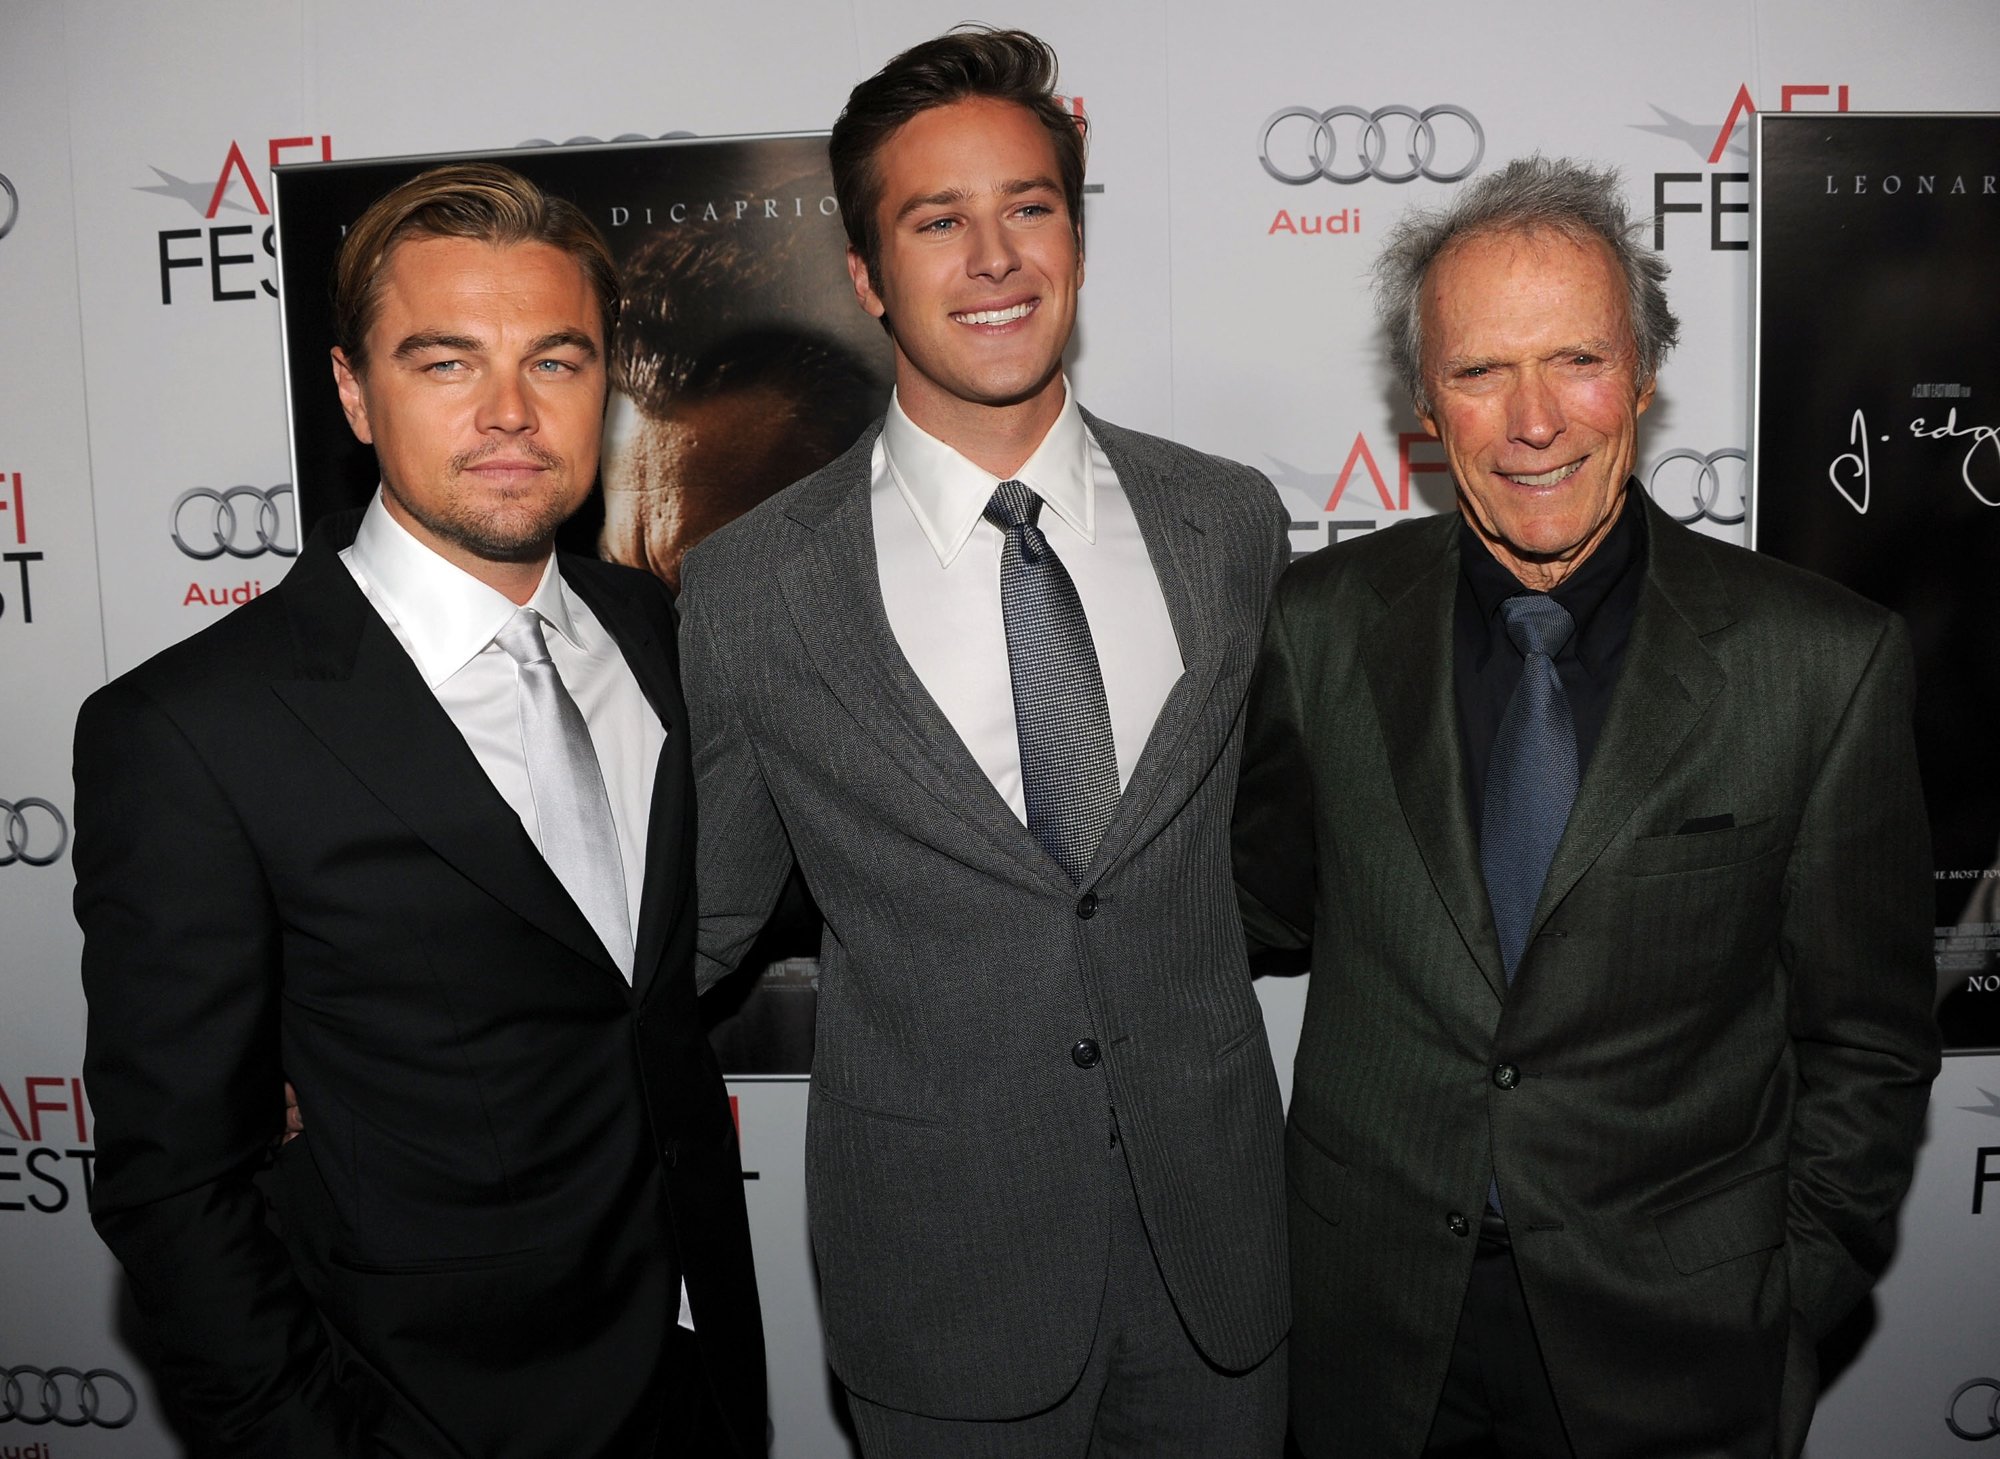 'J. Edgar' Leonardo DiCaprio, Armie Hammer, and Clint Eastwood on the red carpet